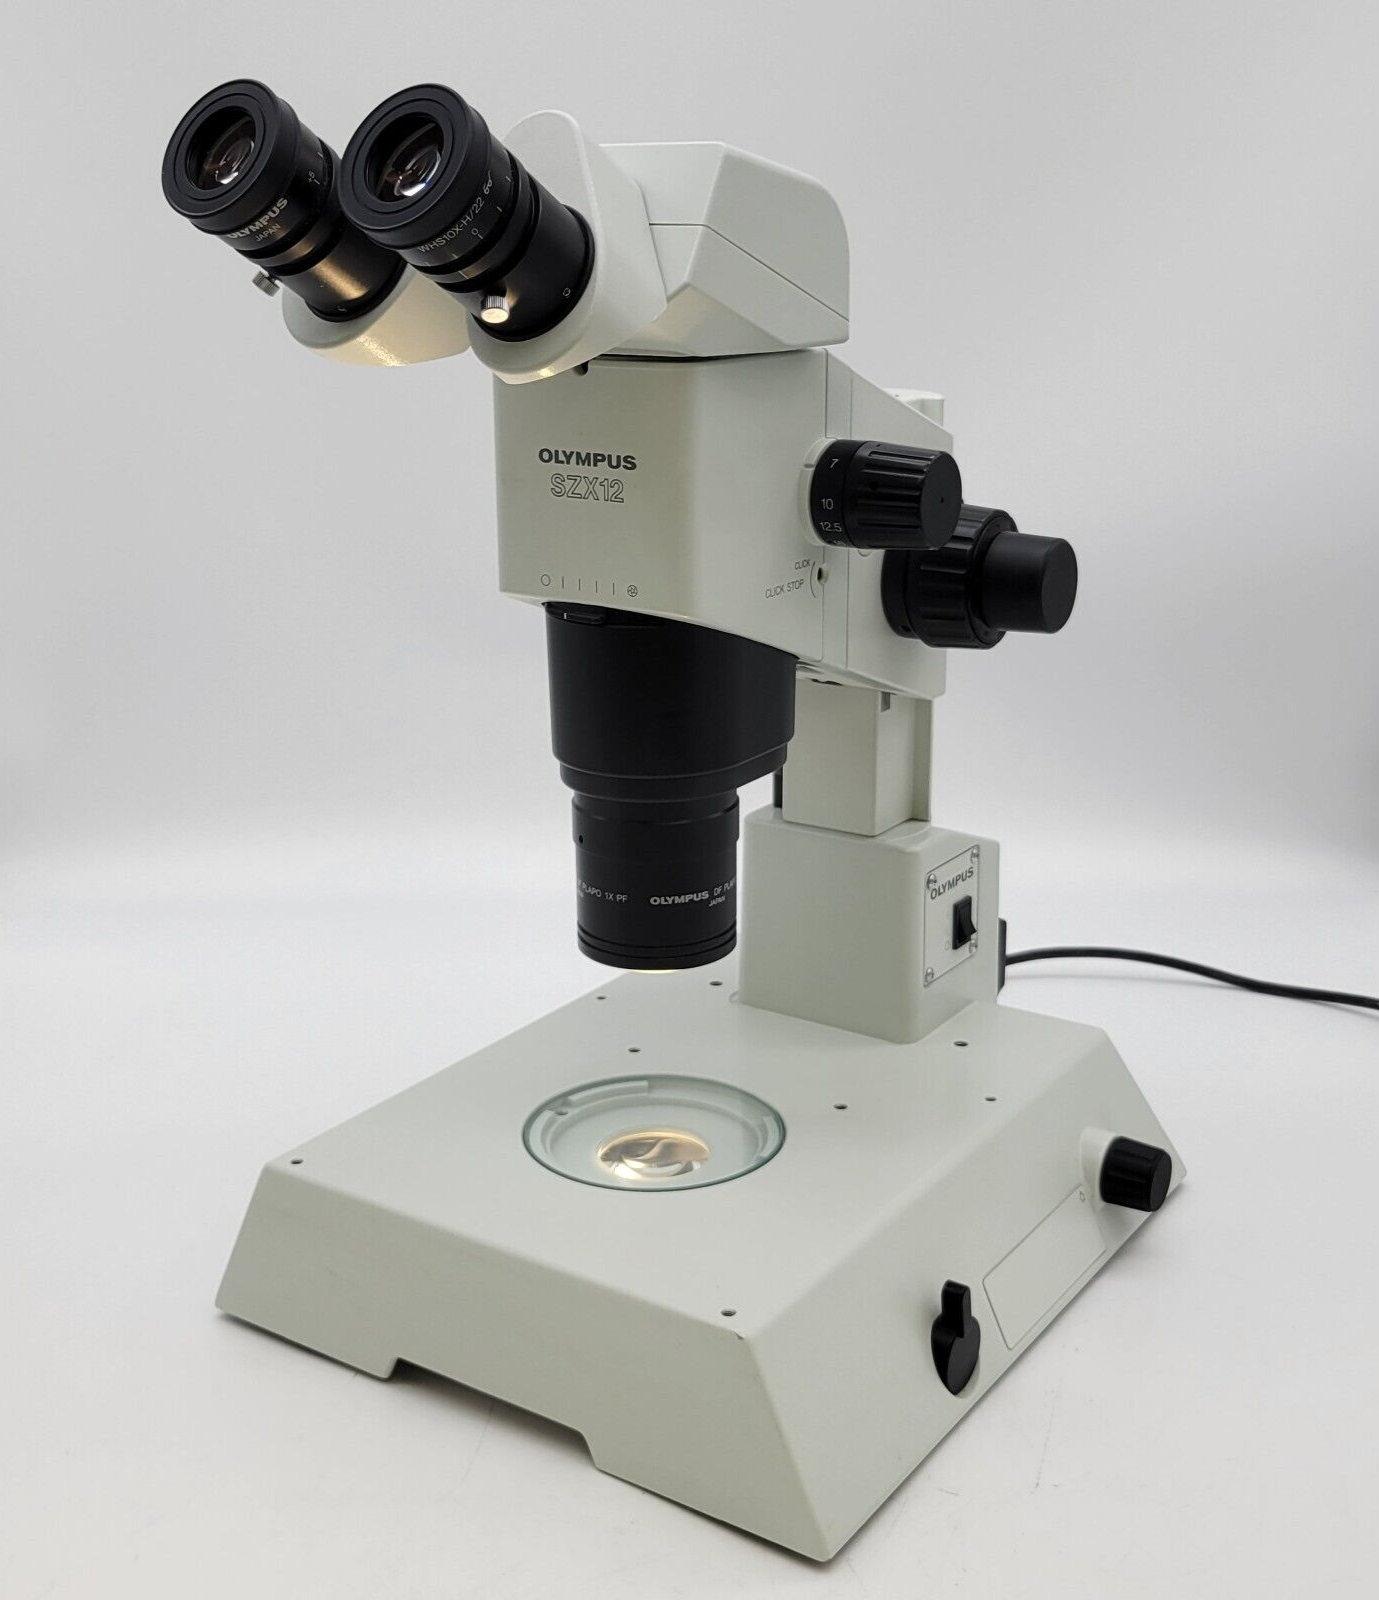 Olympus Stereo Microscope SZX12 with Transmitted Light Stand for IVF - microscopemarketplace